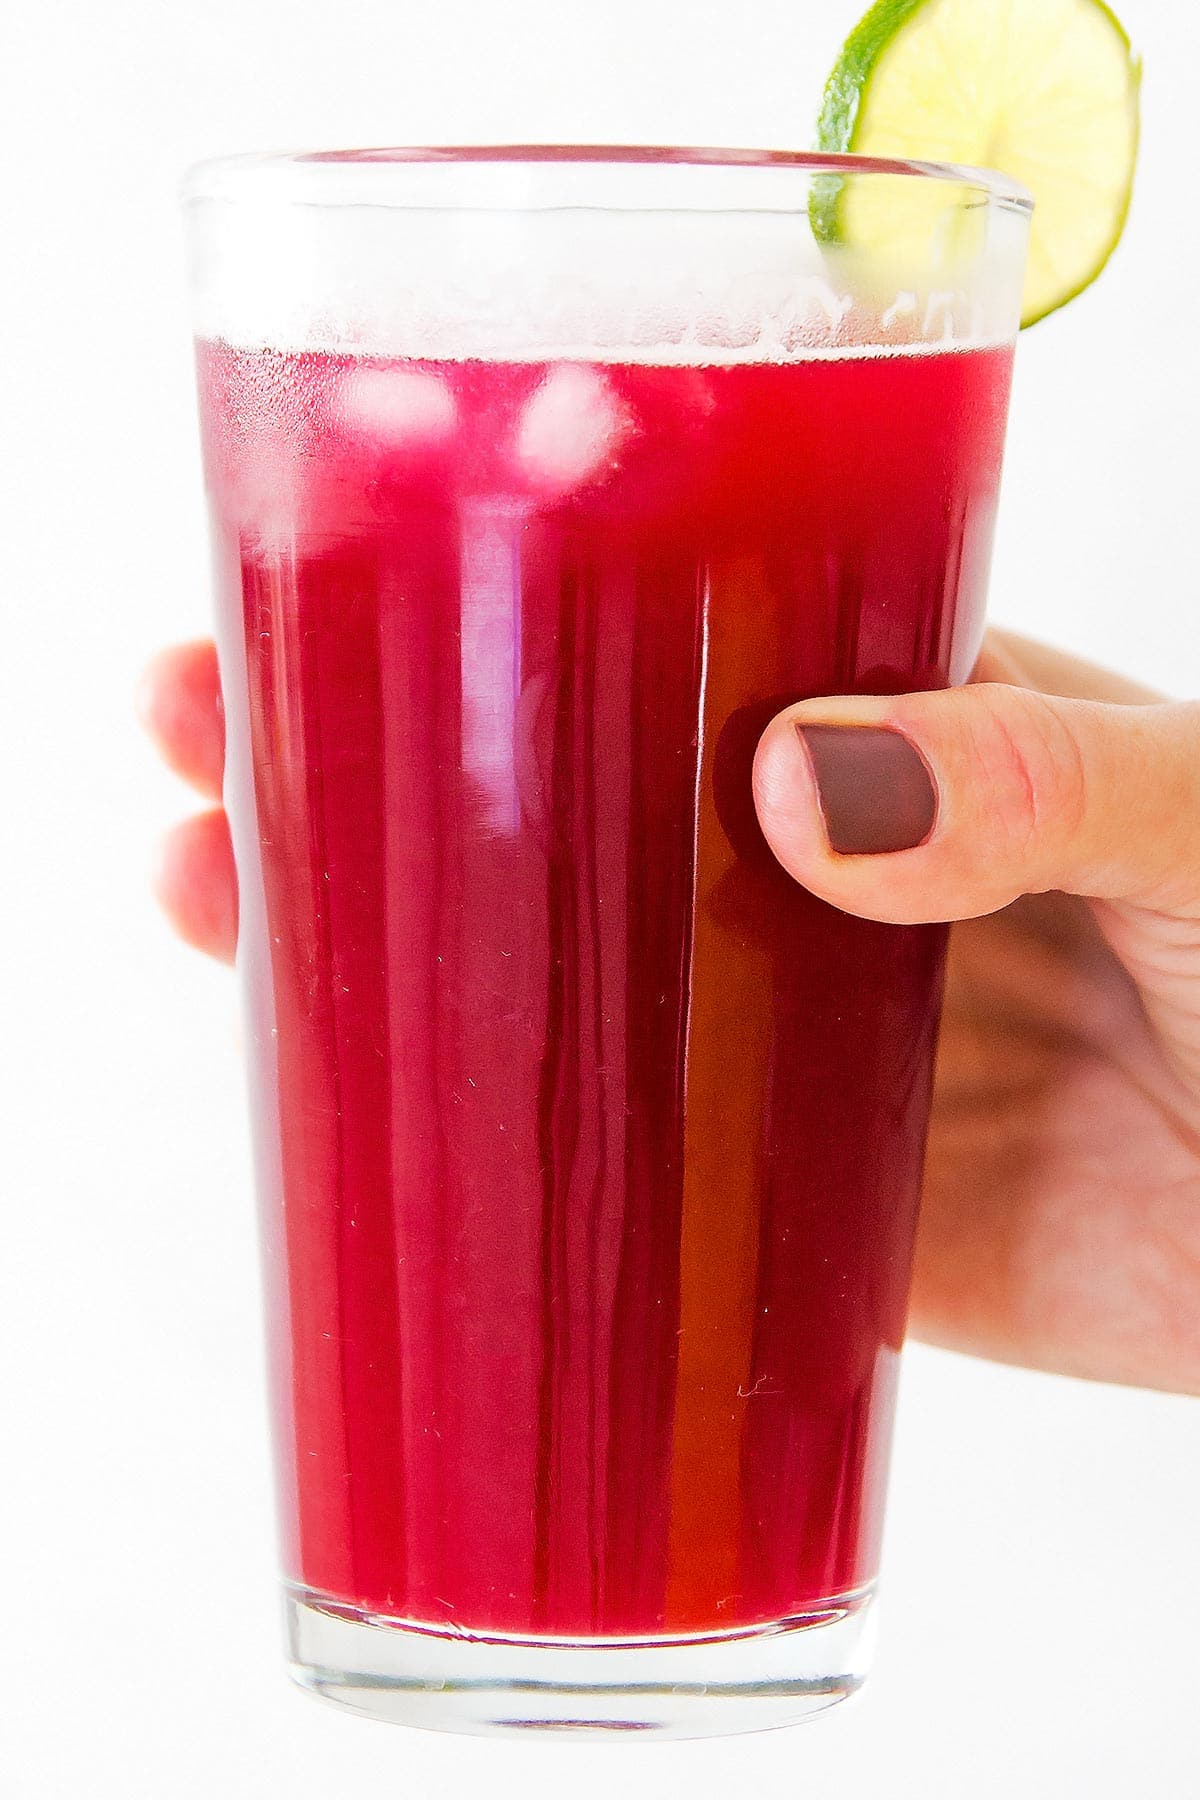 Glass of Prickly Pear Juice